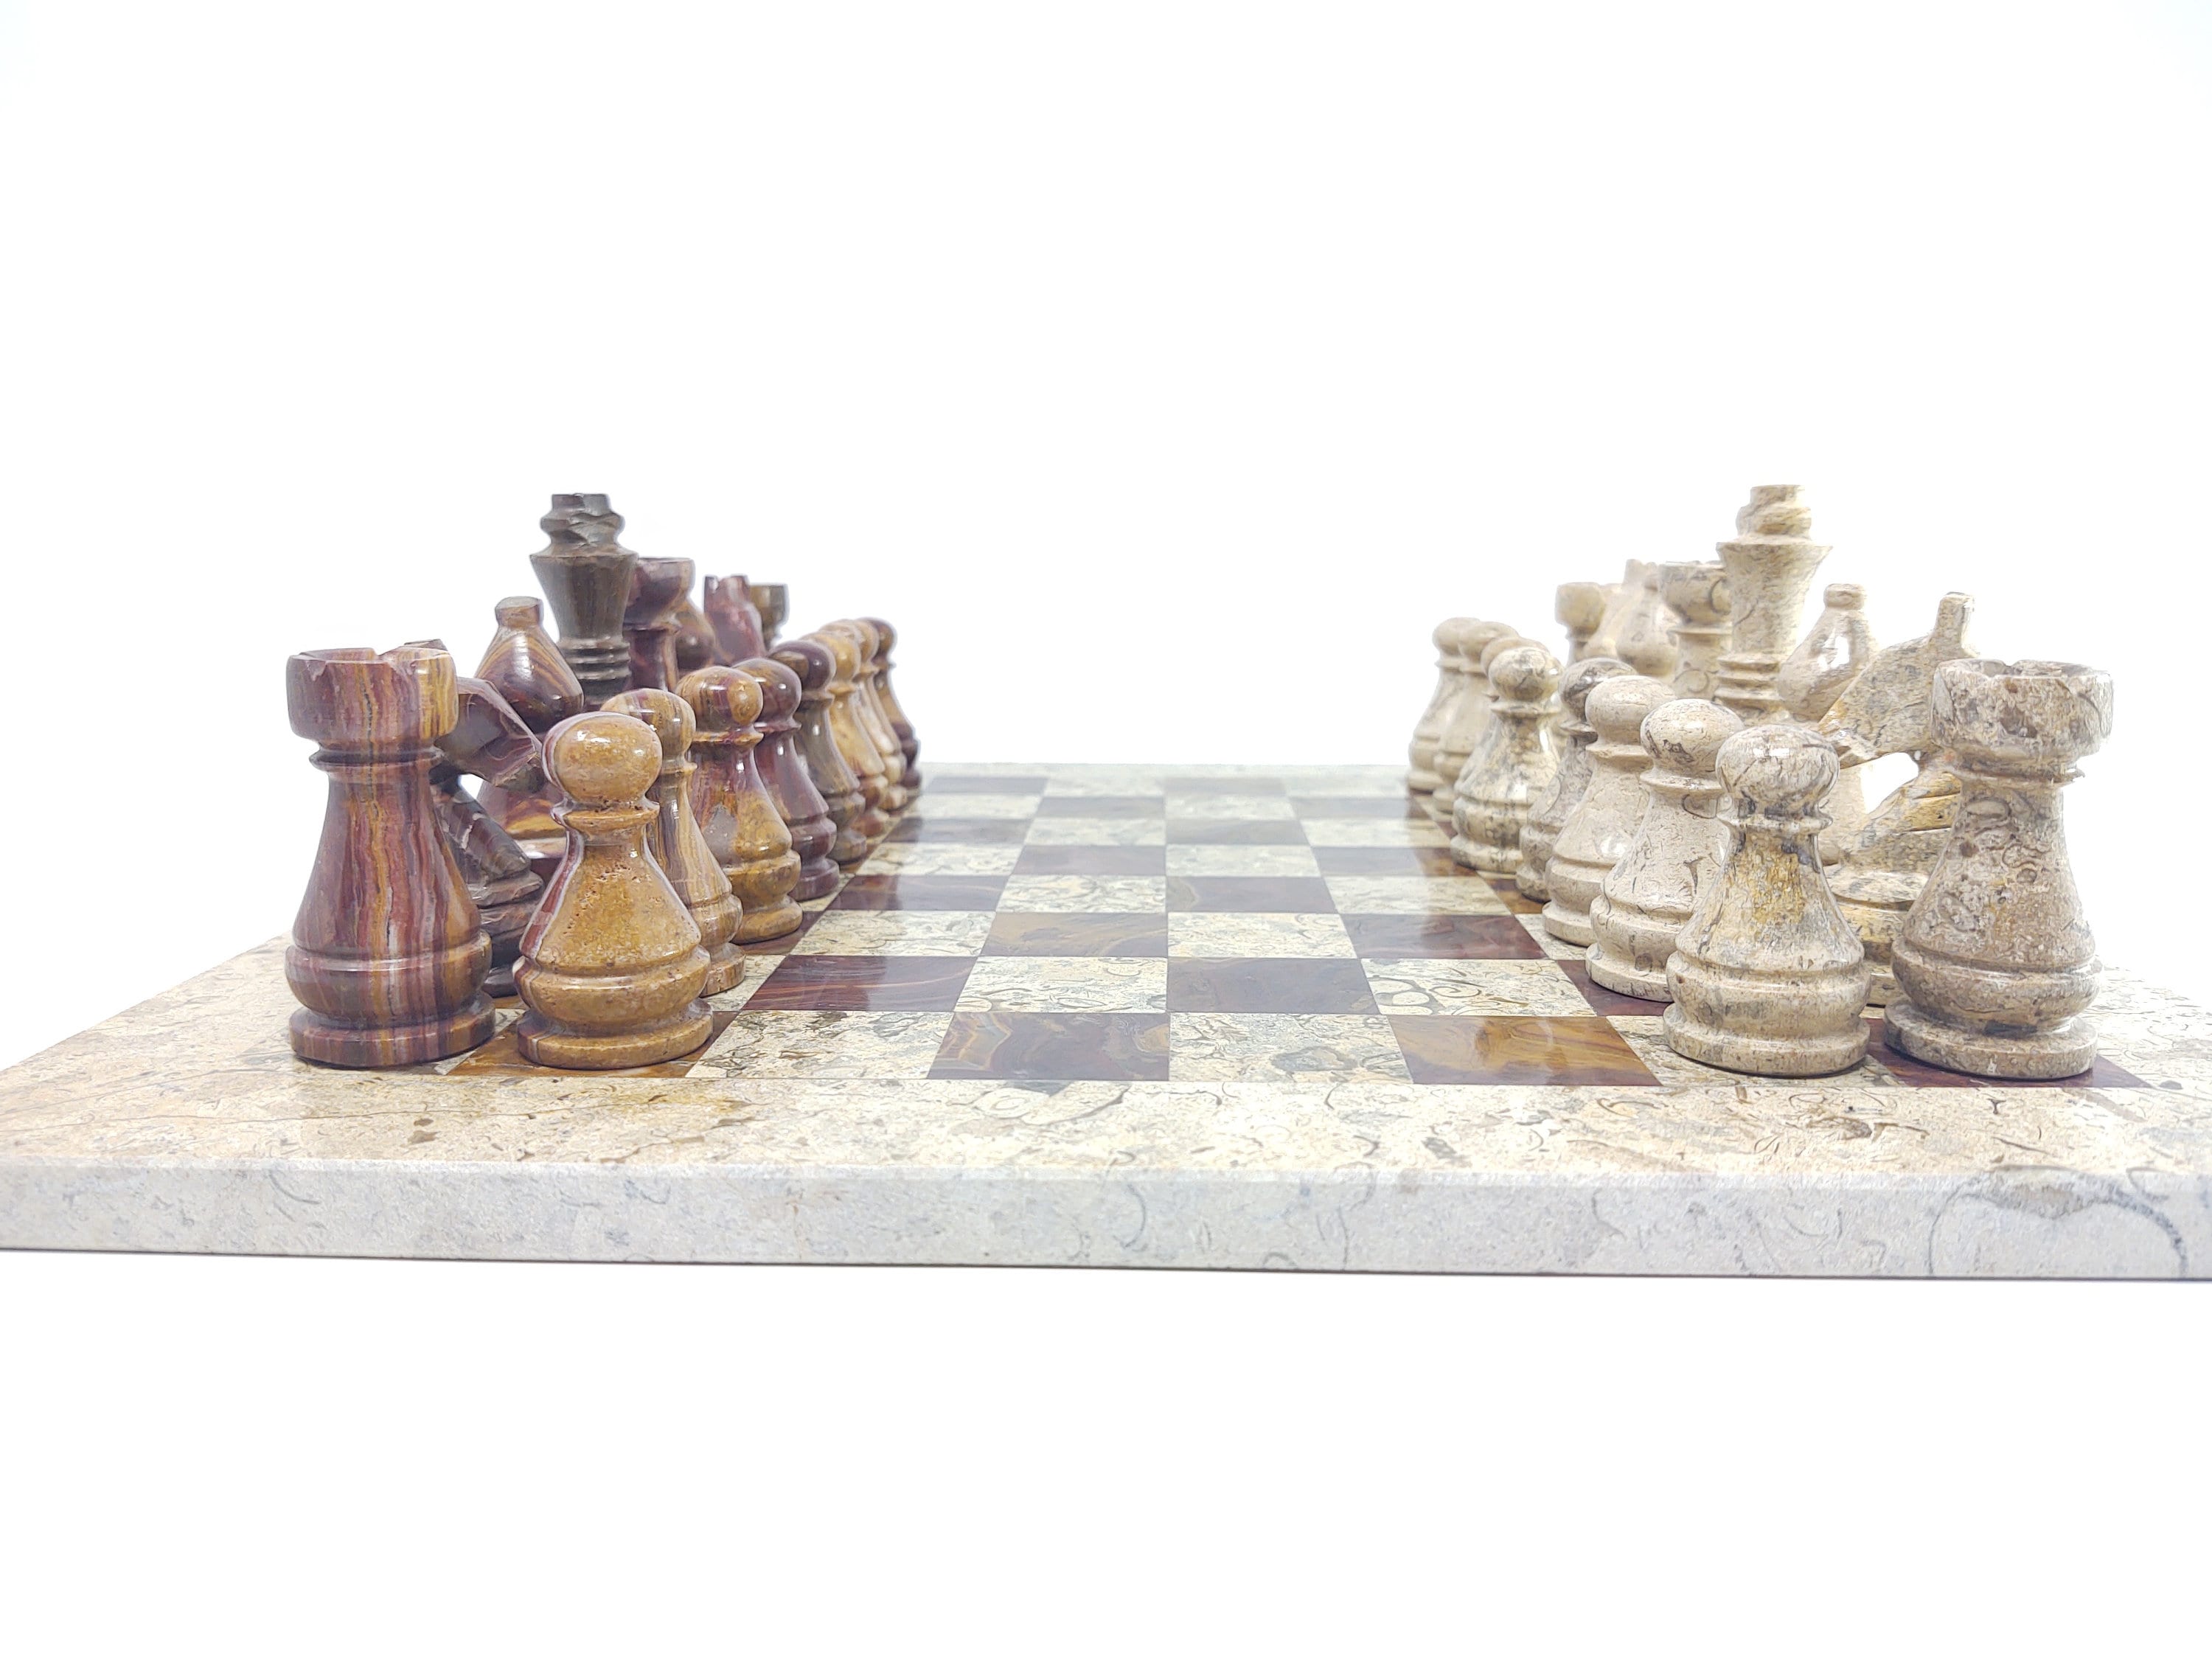 3.7 Emperor Series Staunton Chess Pieces Only set- Double Weighted Ro –  royalchessmall